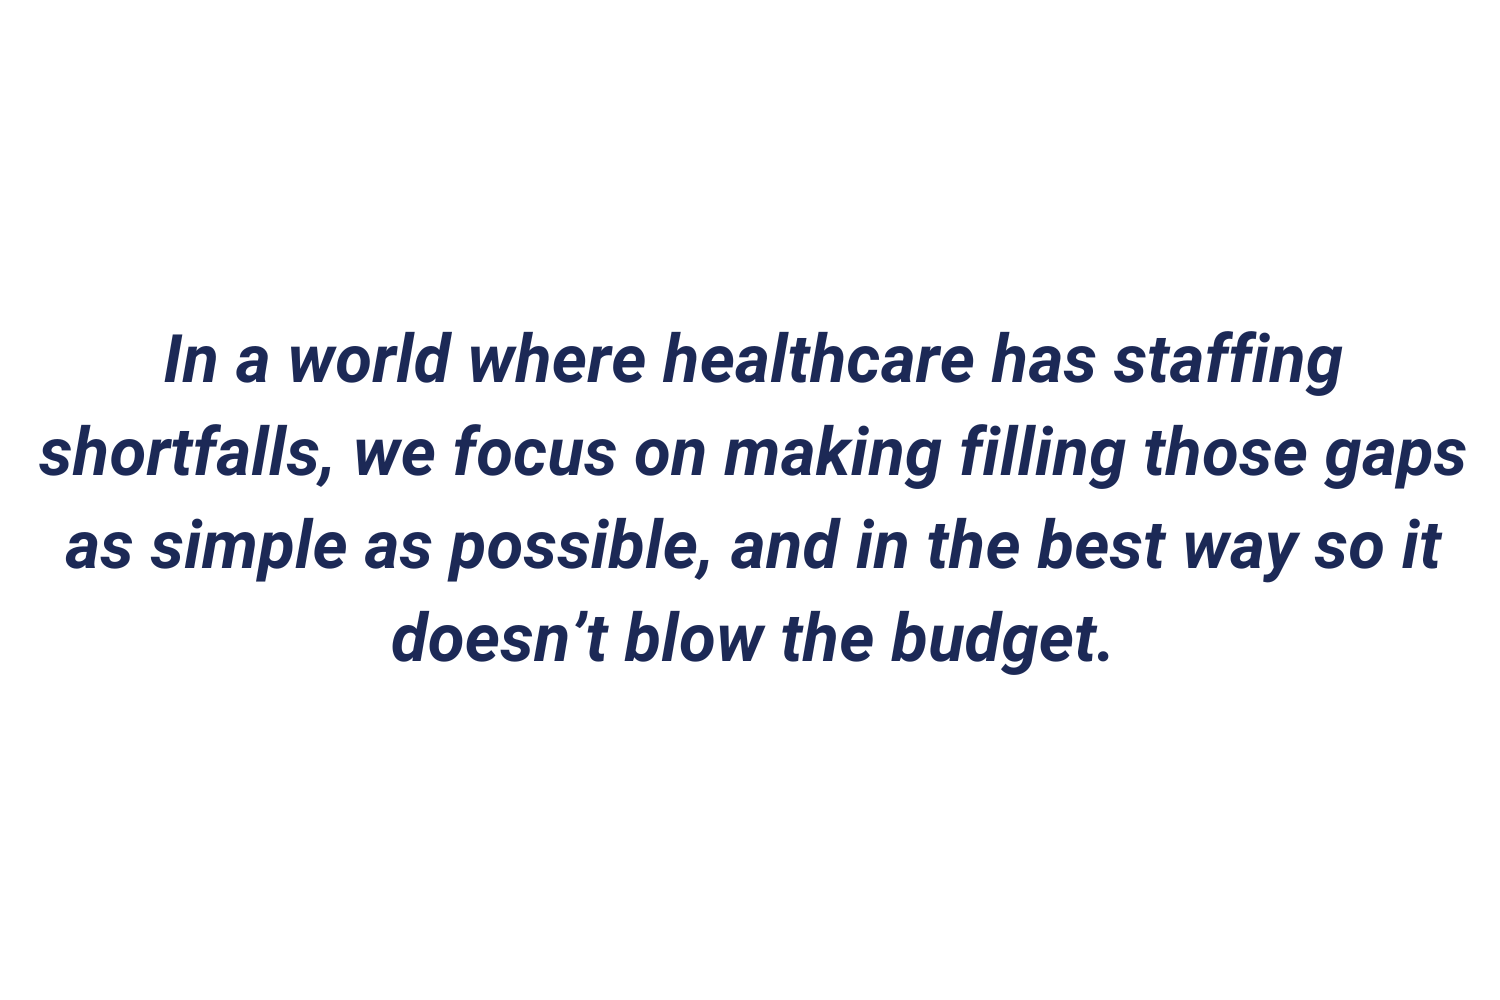 In a world where healthcare has staffing shortfalls, we focus on making filling those gaps as simple as possible, and in the best way so it doesn’t blow the budget.